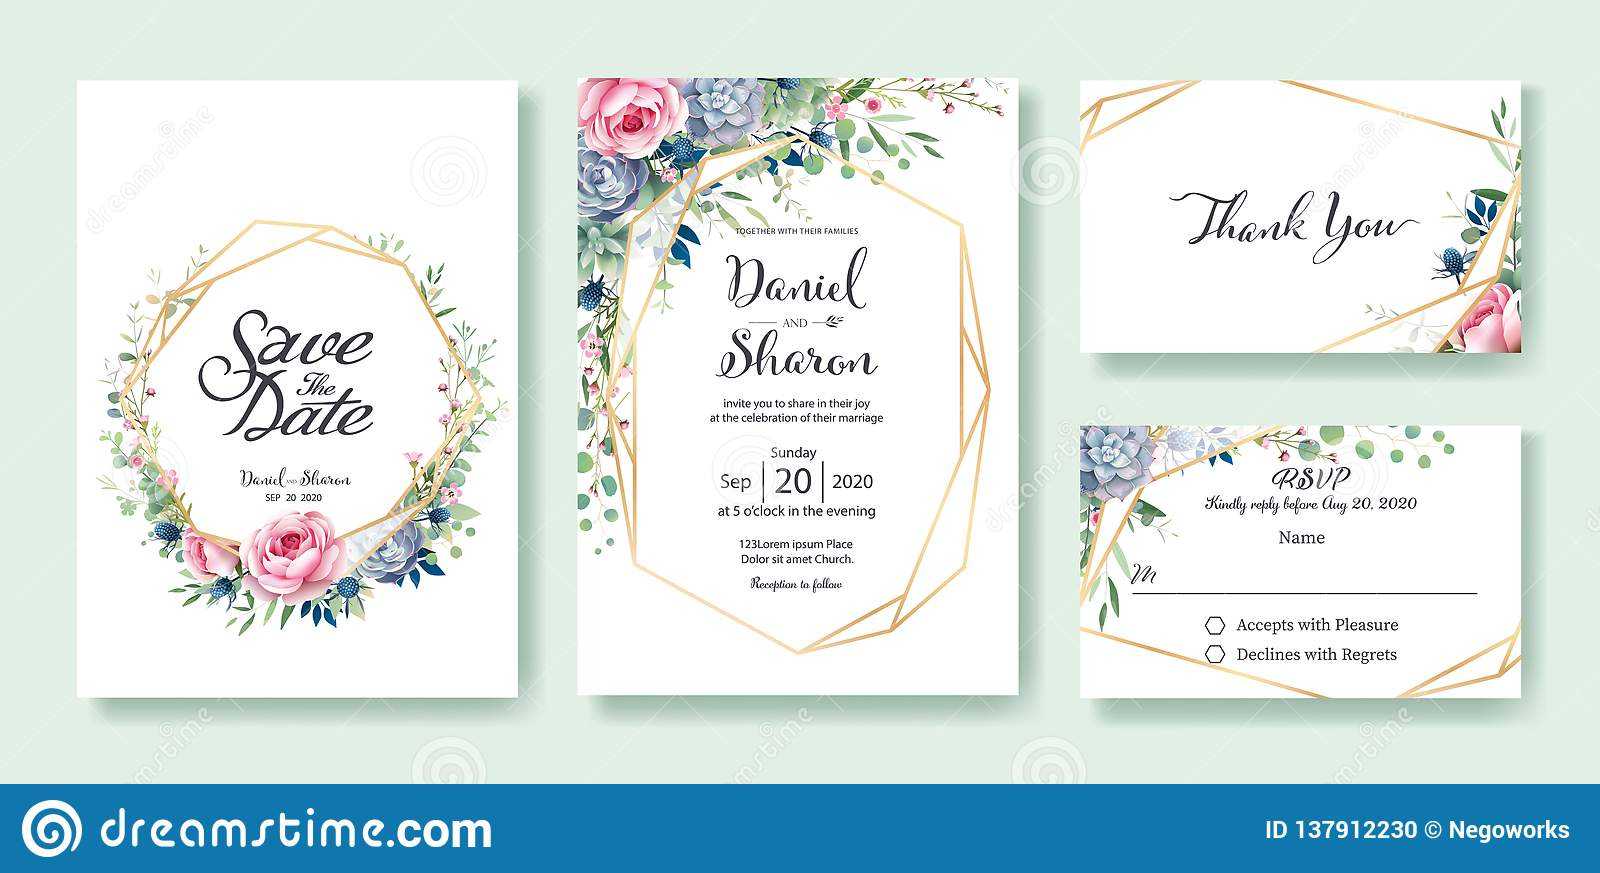 Wedding Invitation, Save The Date, Thank You, Rsvp Card With Regard To Template For Rsvp Cards For Wedding